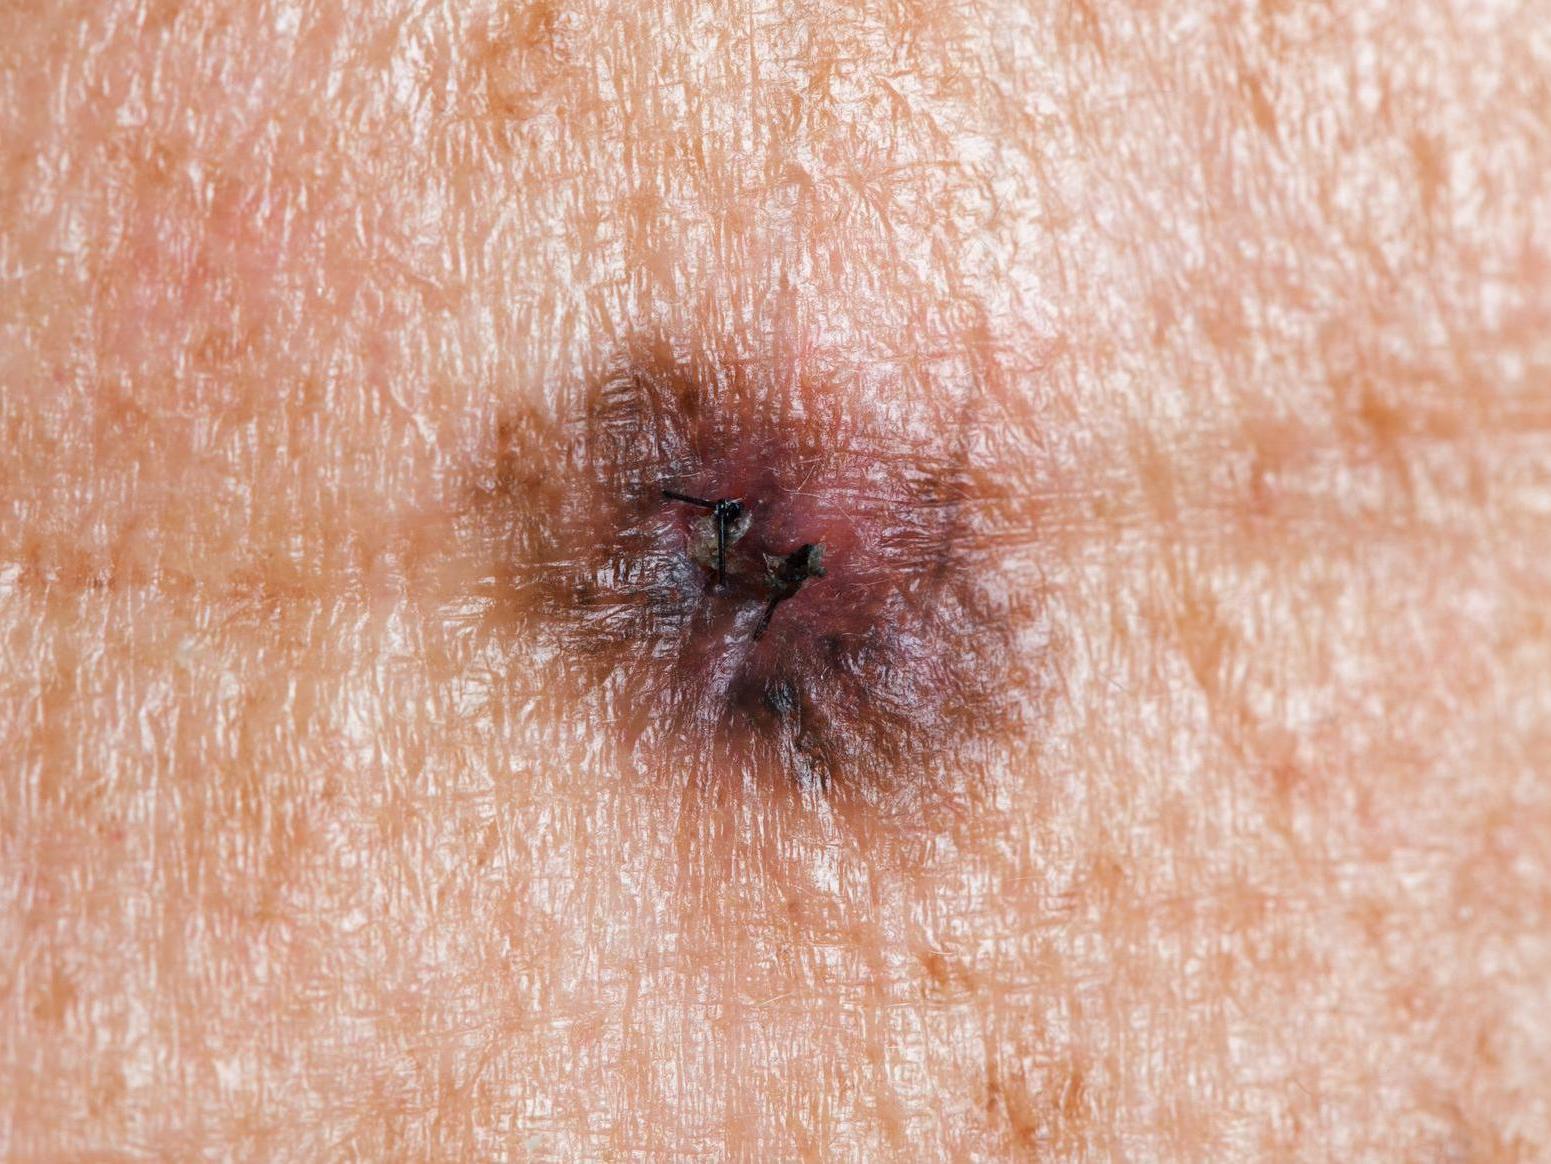 Melanoma is a form of skin cancer that accounts for more than 2,000 deaths in the UK every year